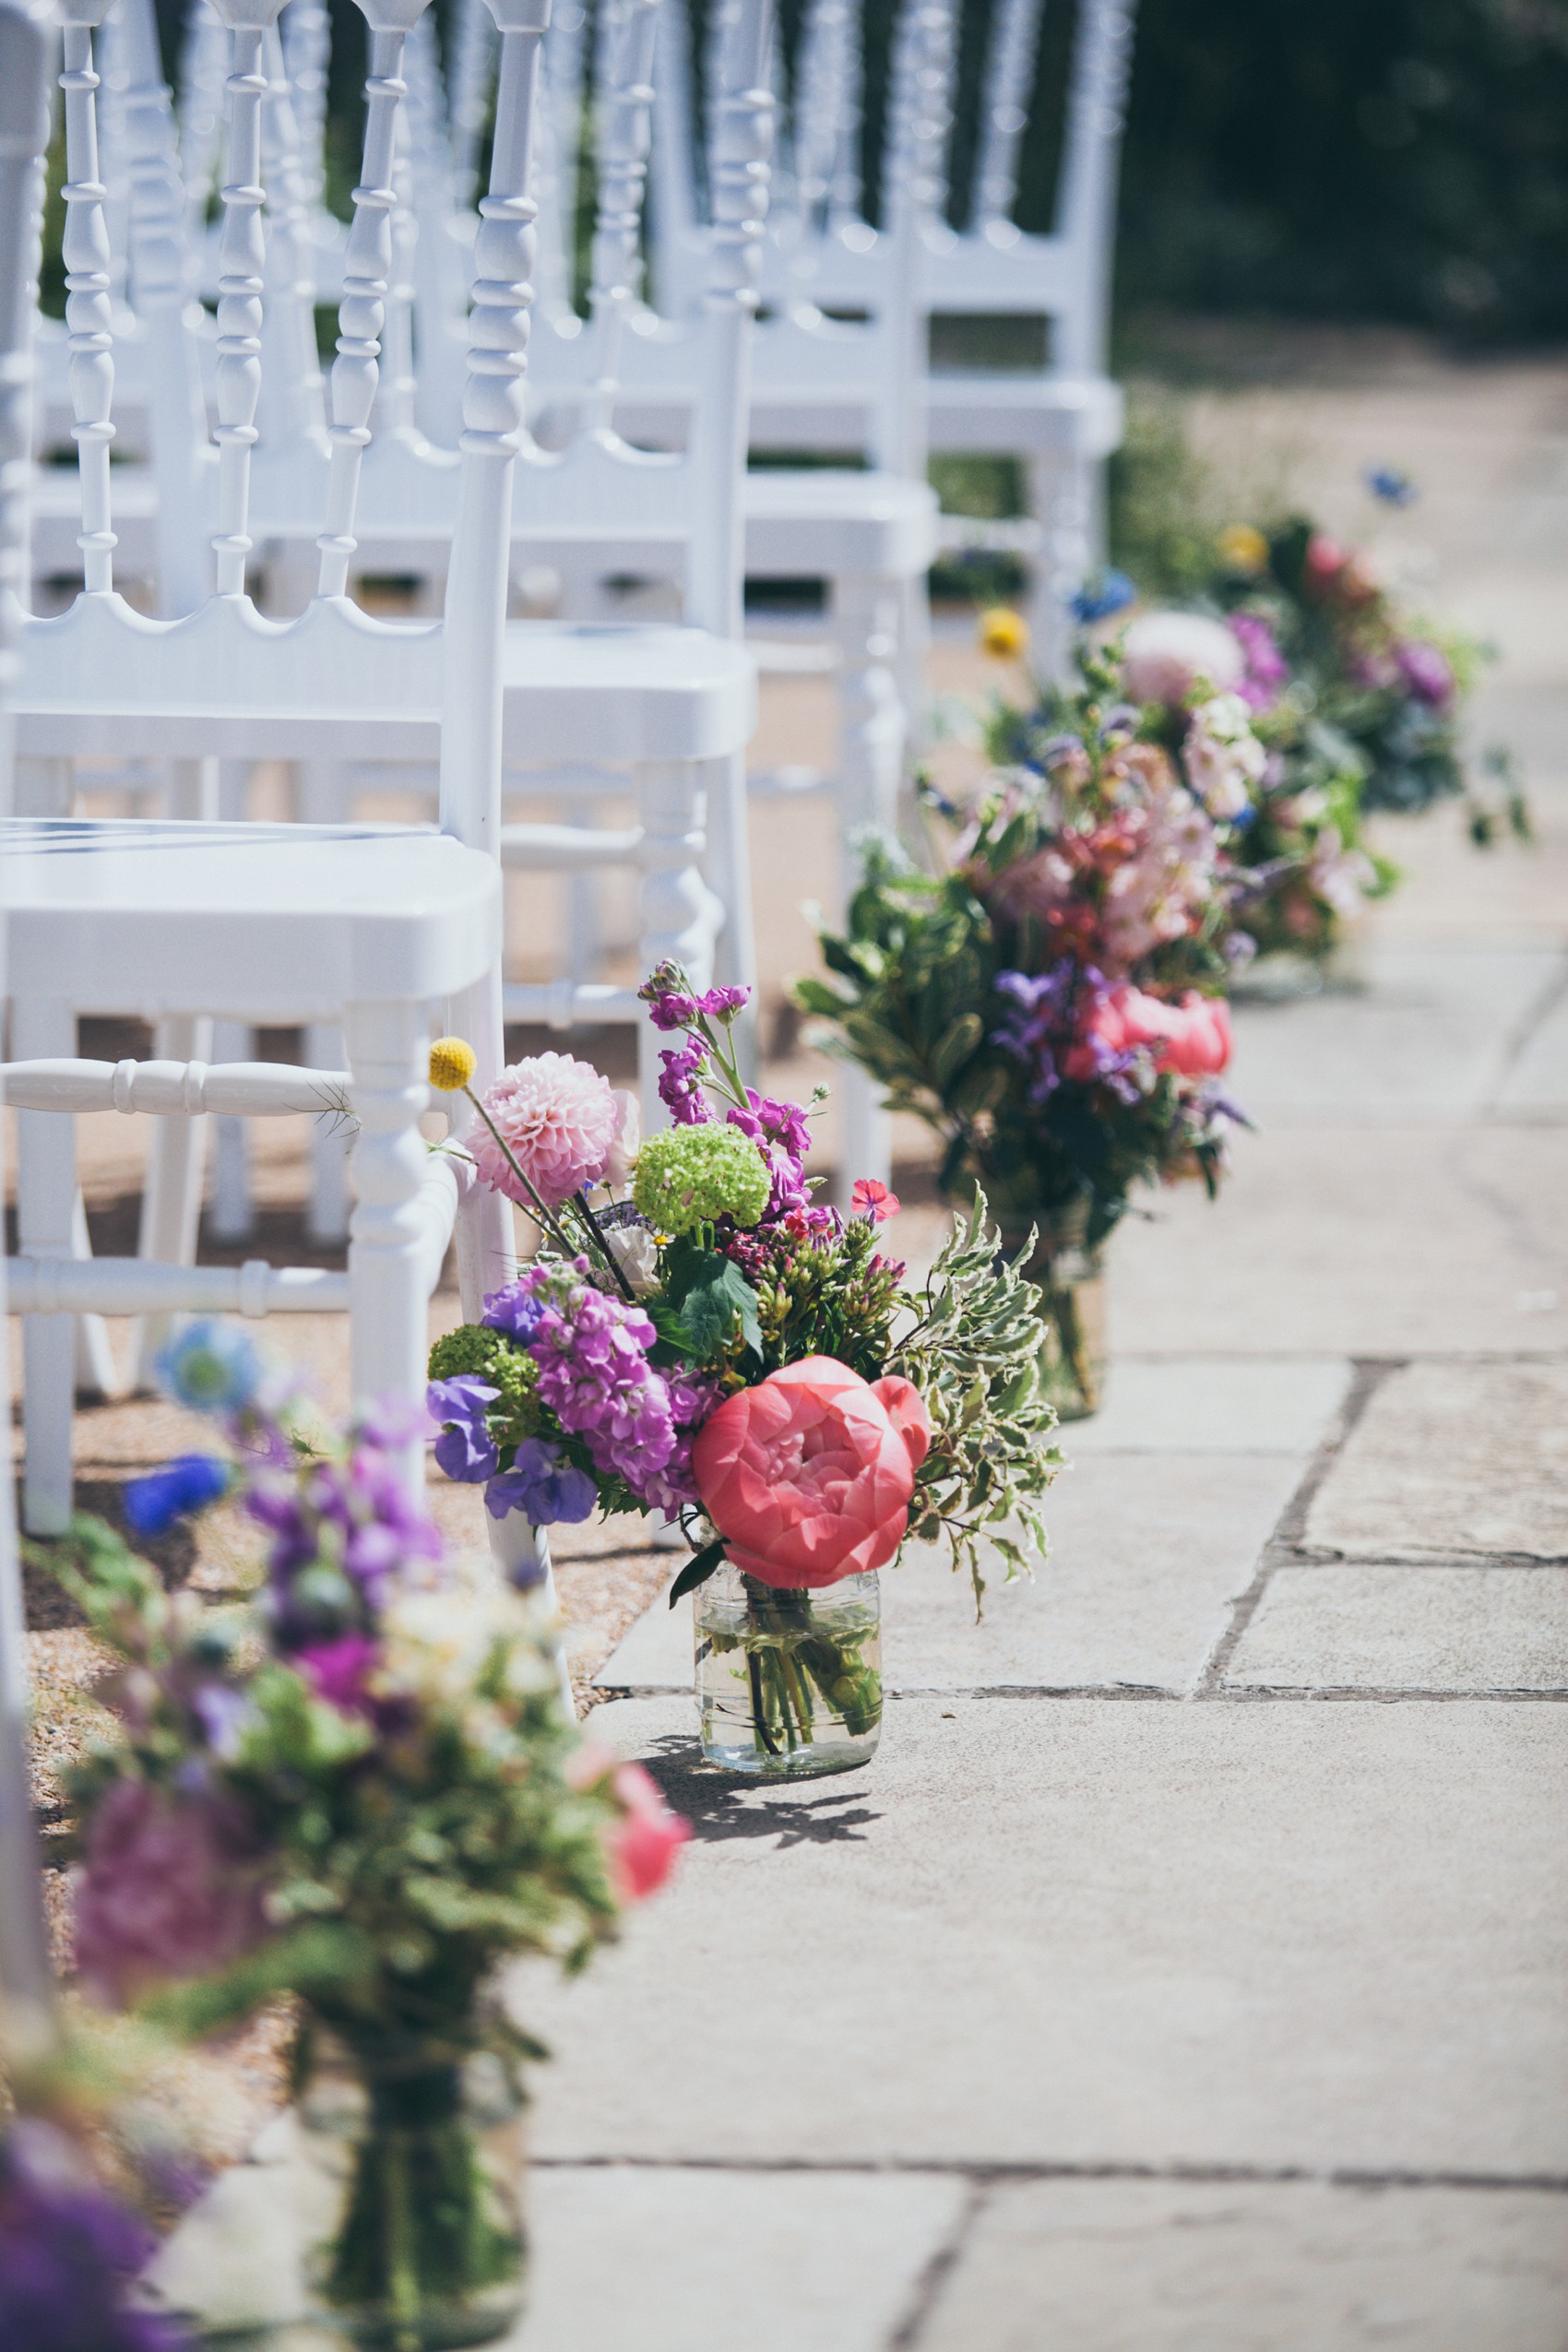 Charlie Brear dress colourful summer garden party wedding Caswell House 2